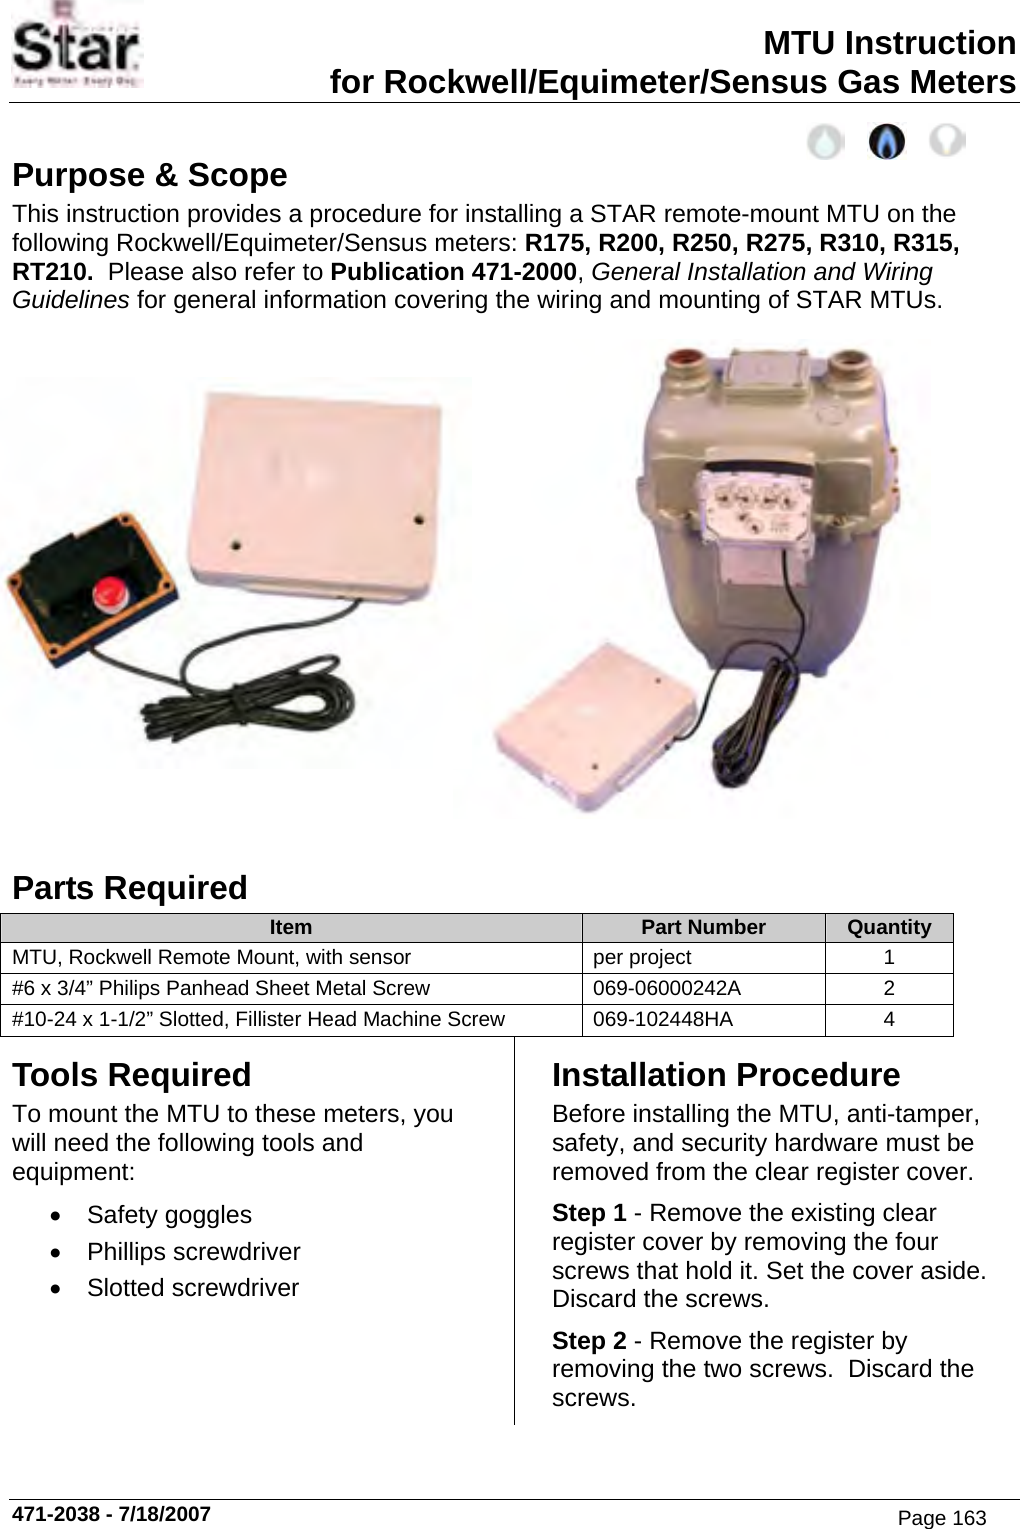 MTU Instruction for Rockwell/Equimeter/Sensus Gas Meters Purpose &amp; Scope This instruction provides a procedure for installing a STAR remote-mount MTU on the following Rockwell/Equimeter/Sensus meters: R175, R200, R250, R275, R310, R315, RT210.  Please also refer to Publication 471-2000, General Installation and Wiring Guidelines for general information covering the wiring and mounting of STAR MTUs.  Parts Required Item  Part Number  Quantity MTU, Rockwell Remote Mount, with sensor  per project  1 #6 x 3/4” Philips Panhead Sheet Metal Screw  069-06000242A  2 #10-24 x 1-1/2” Slotted, Fillister Head Machine Screw  069-102448HA  4 Tools Required To mount the MTU to these meters, you will need the following tools and equipment: • Safety goggles • Phillips screwdriver • Slotted screwdriver Installation Procedure Before installing the MTU, anti-tamper, safety, and security hardware must be removed from the clear register cover. Step 1 - Remove the existing clear register cover by removing the four screws that hold it. Set the cover aside.  Discard the screws. Step 2 - Remove the register by removing the two screws.  Discard the screws. 471-2038 - 7/18/2007 Page 163